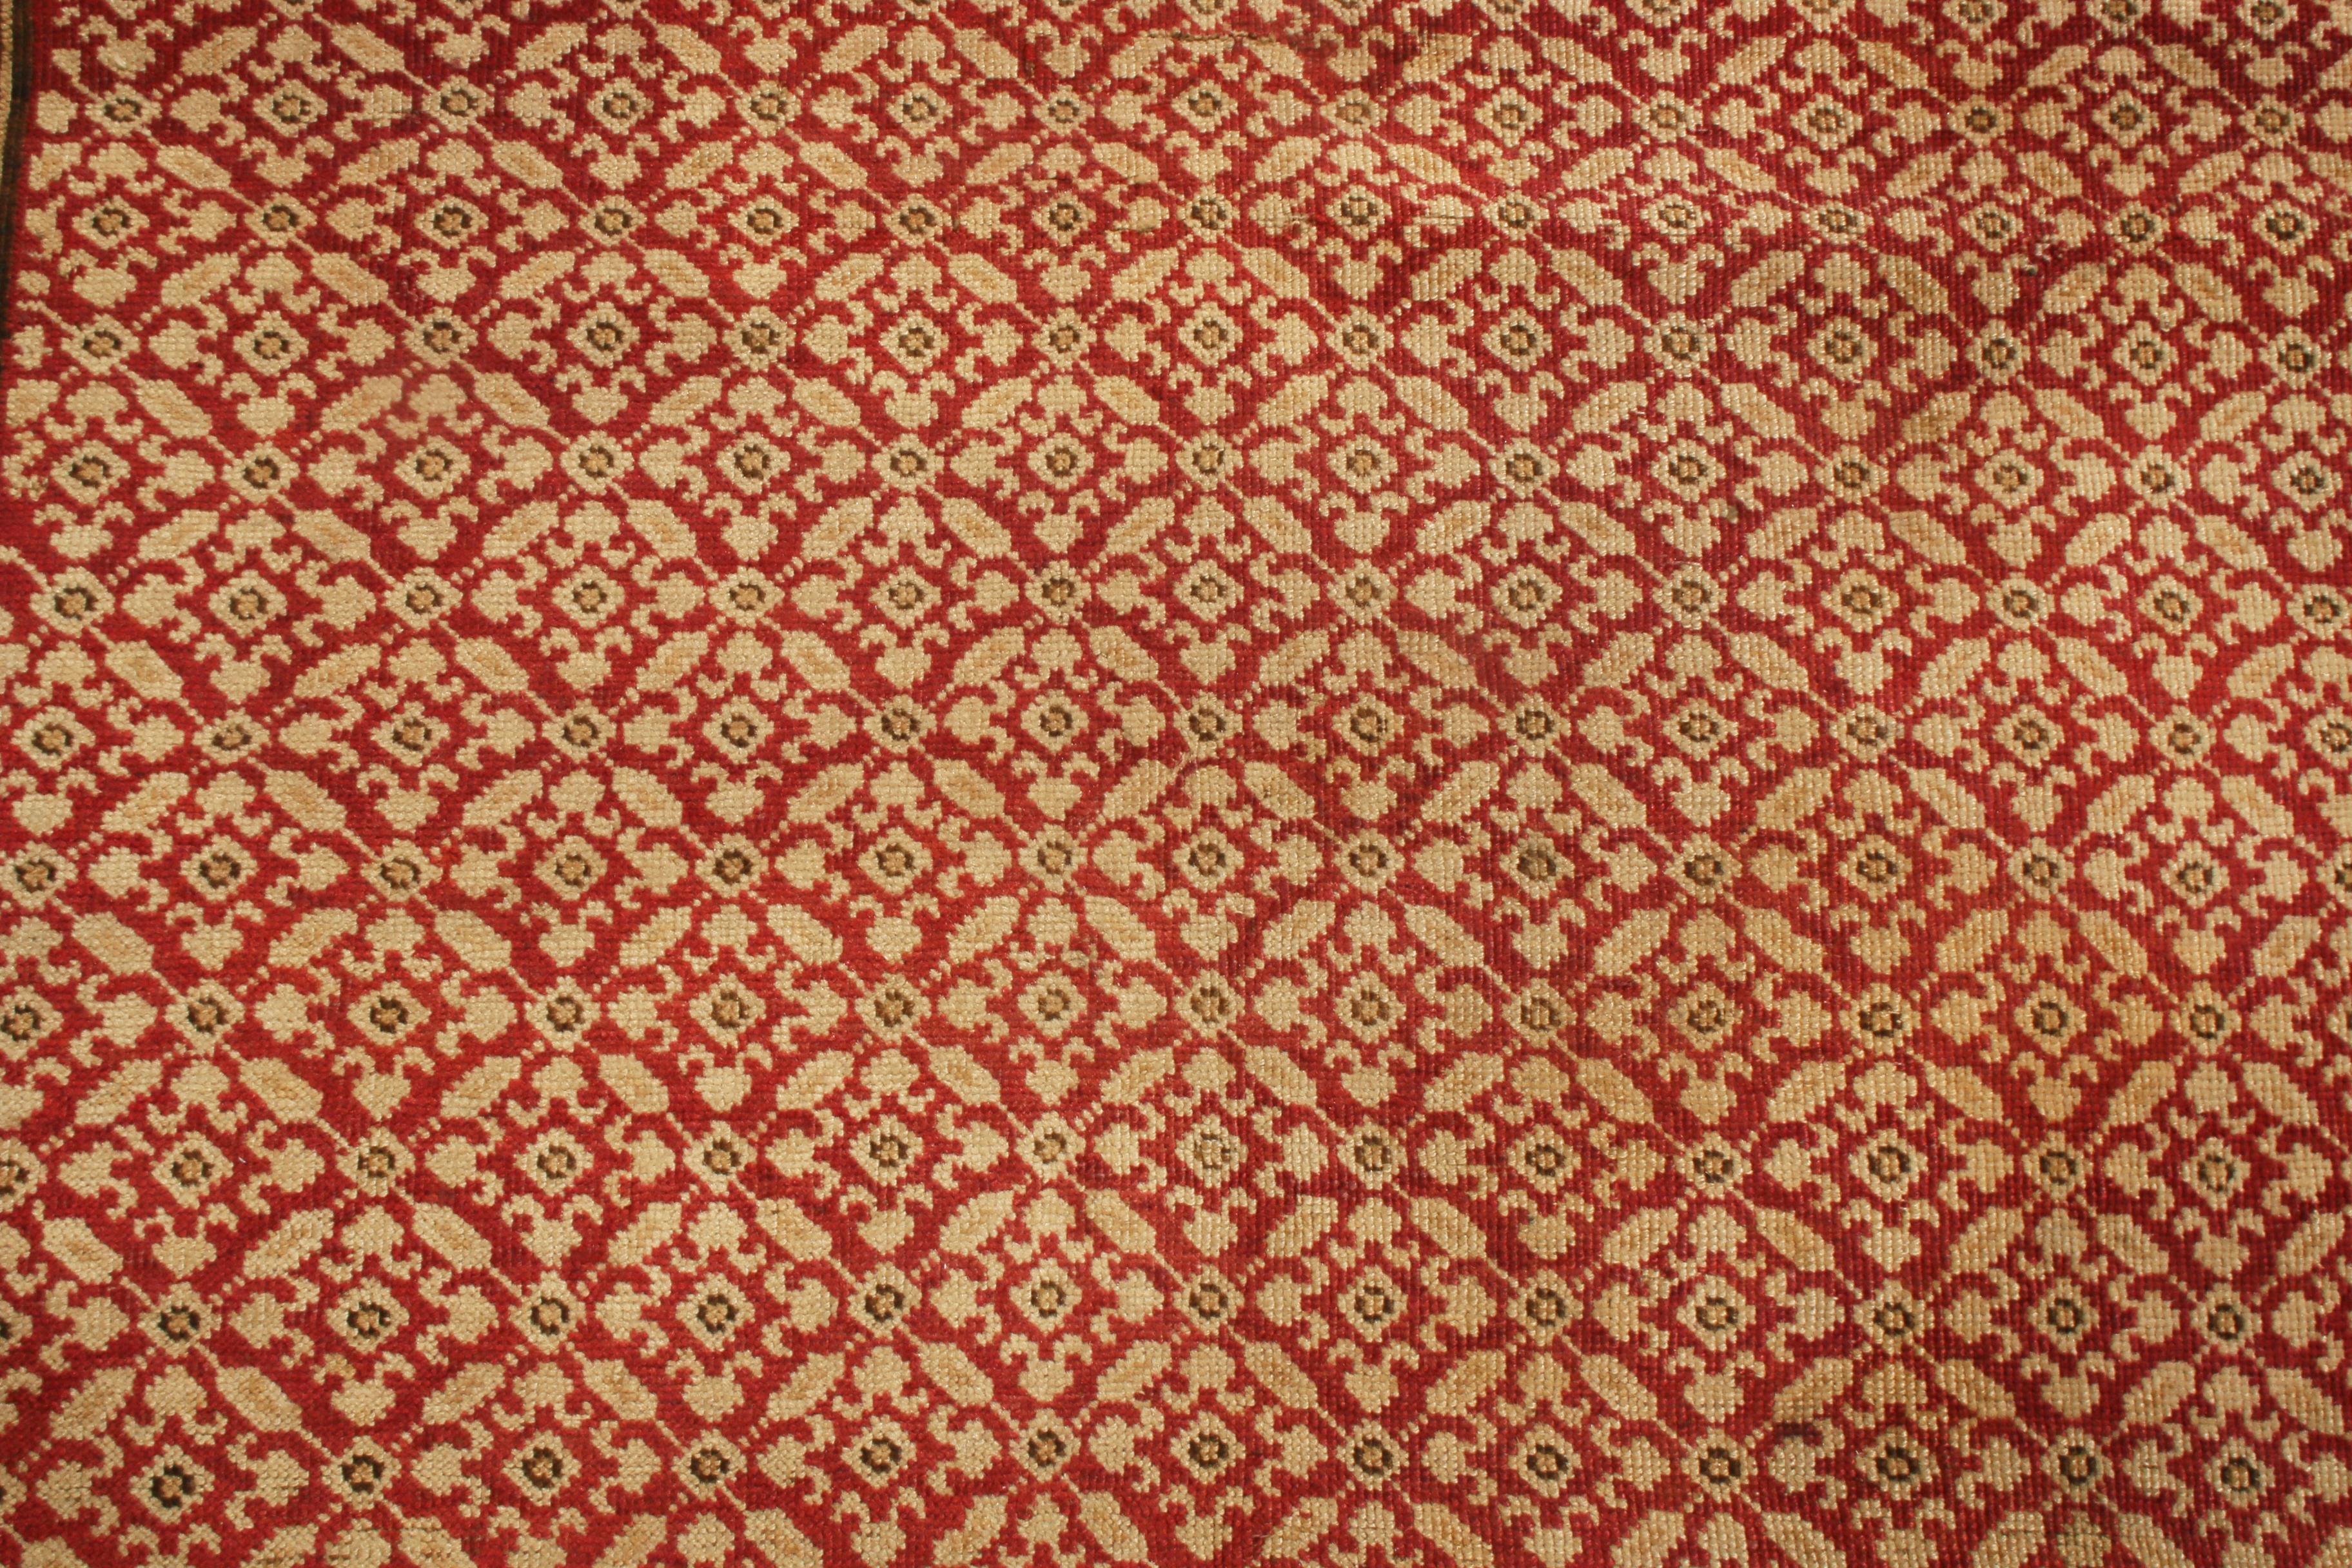 Hand-Knotted Antique Karabagh Traditional Red and Golden Beige Wool Rug